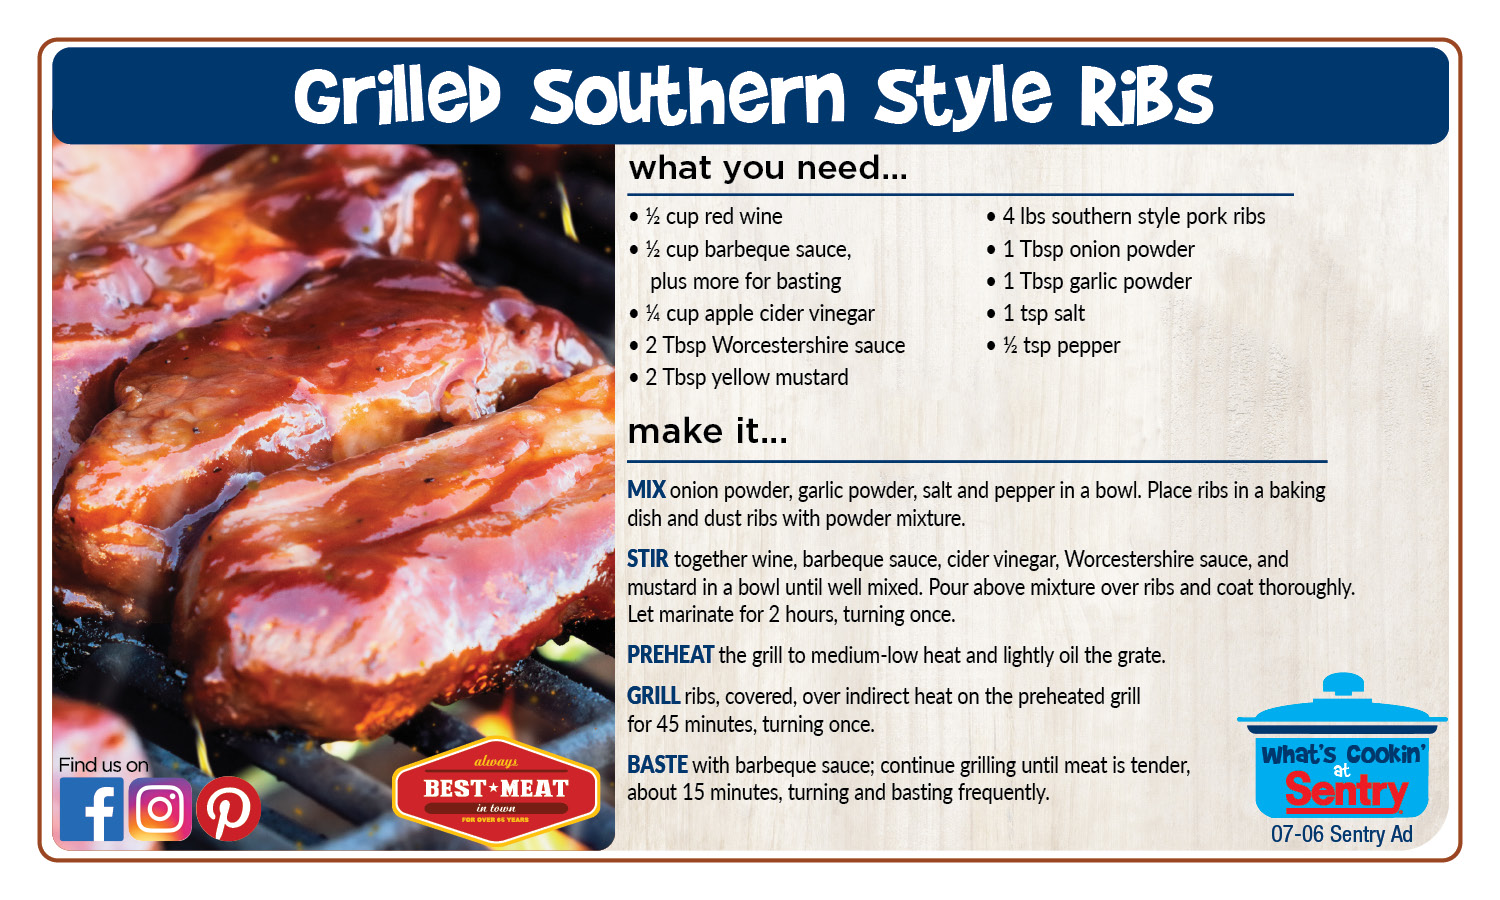 Recipe: Grilled Southern Style Ribs